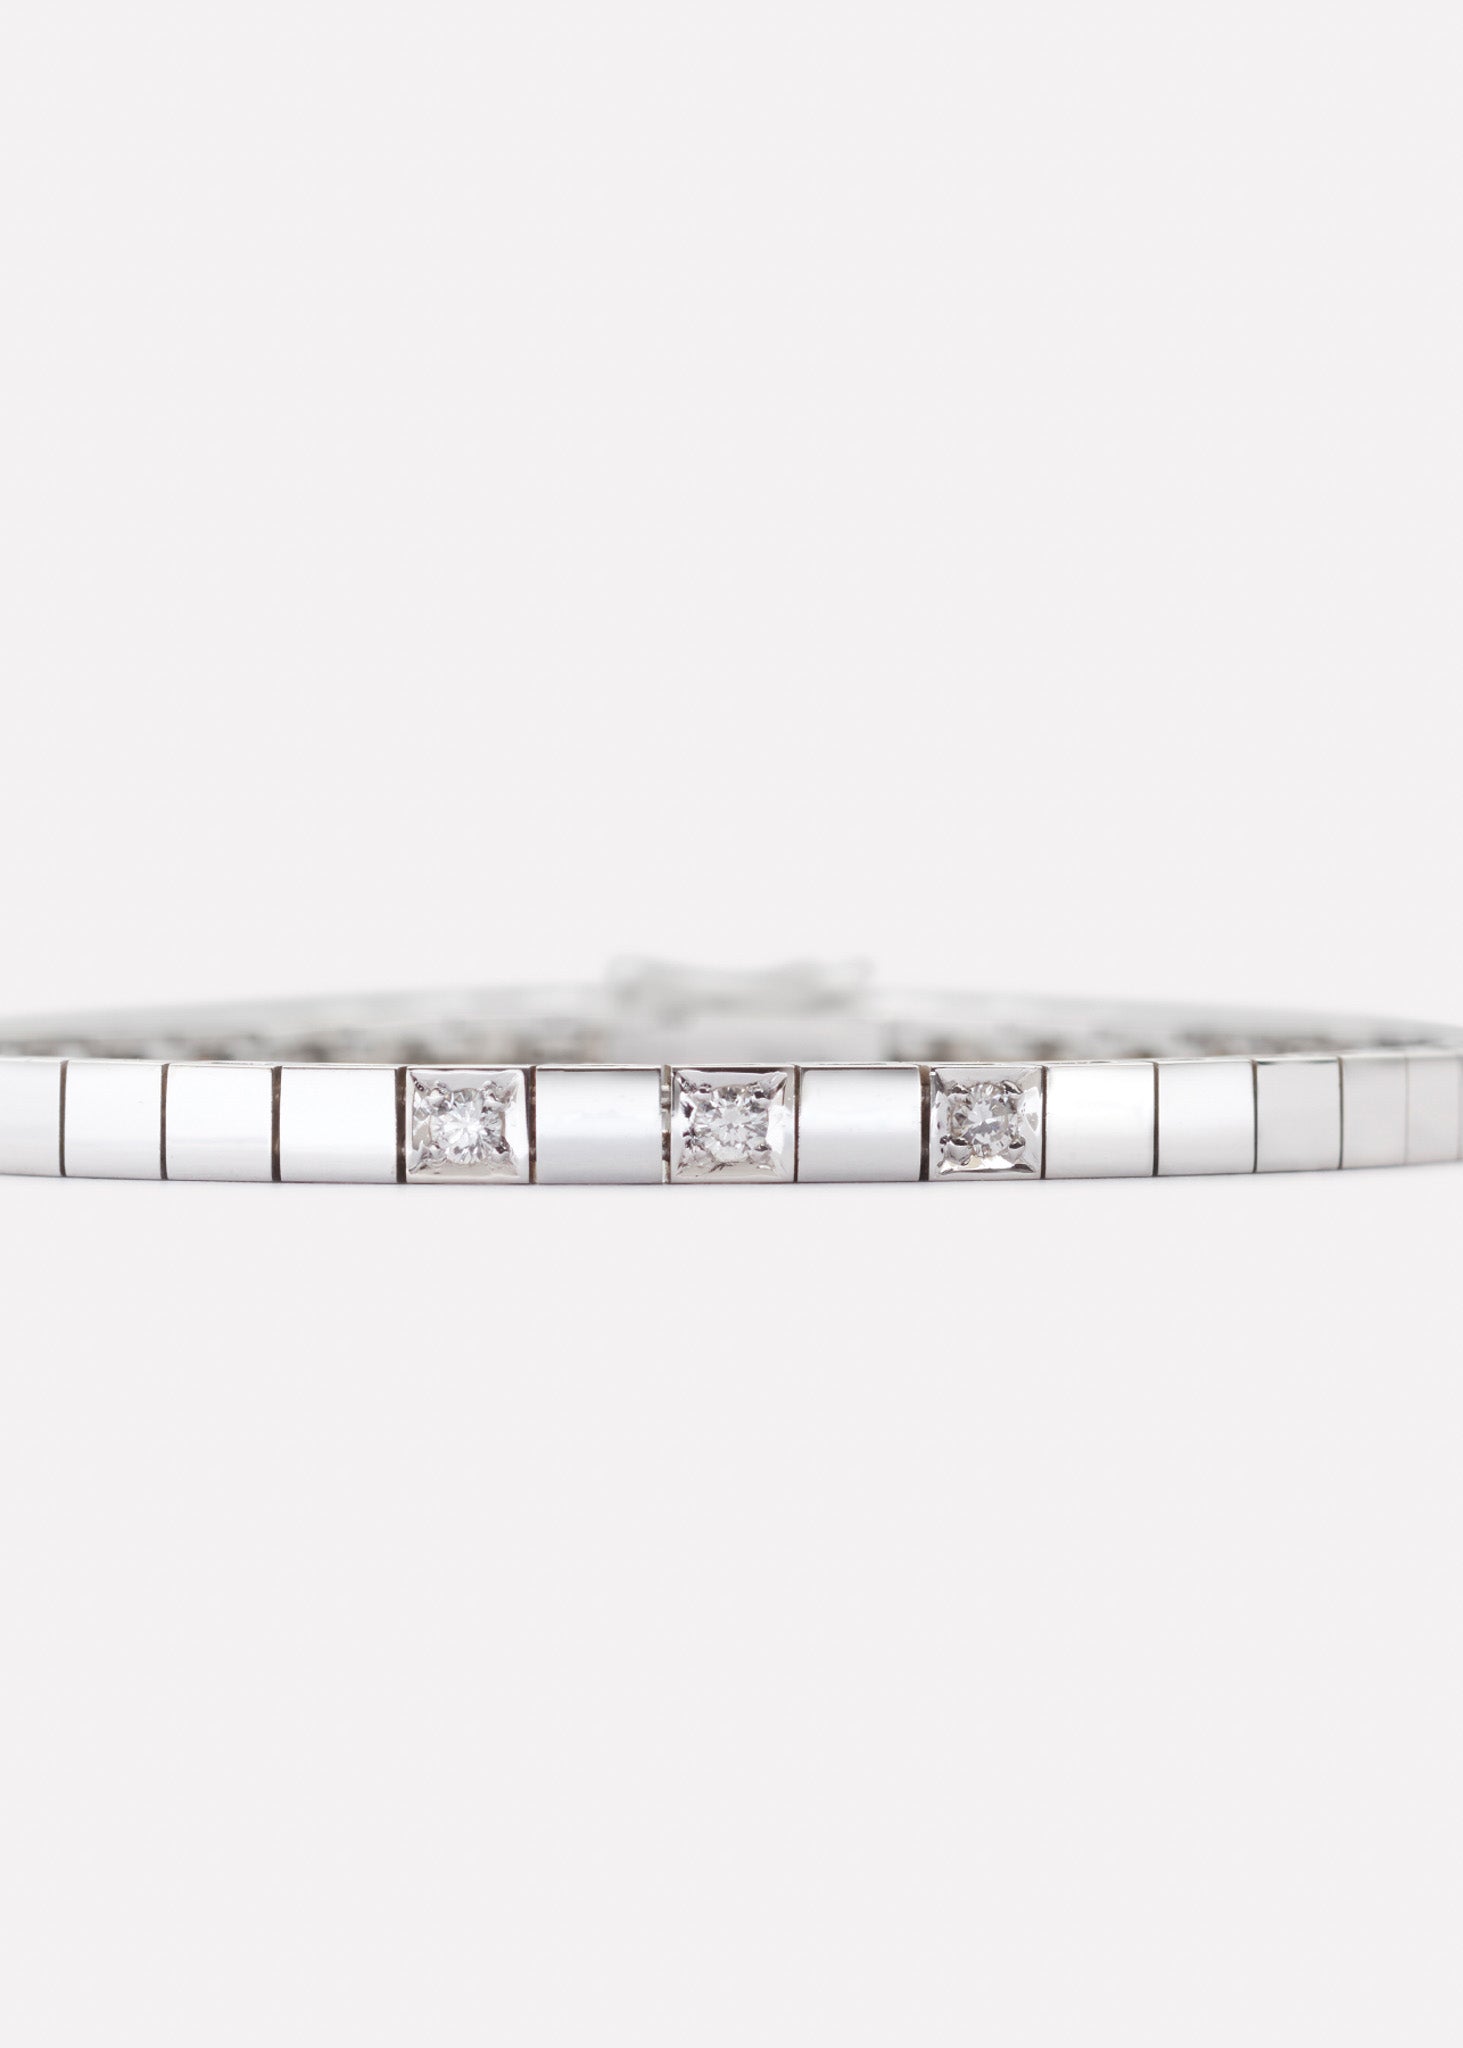 Alliance bracelet in white gold with diamonds 0.15 ct